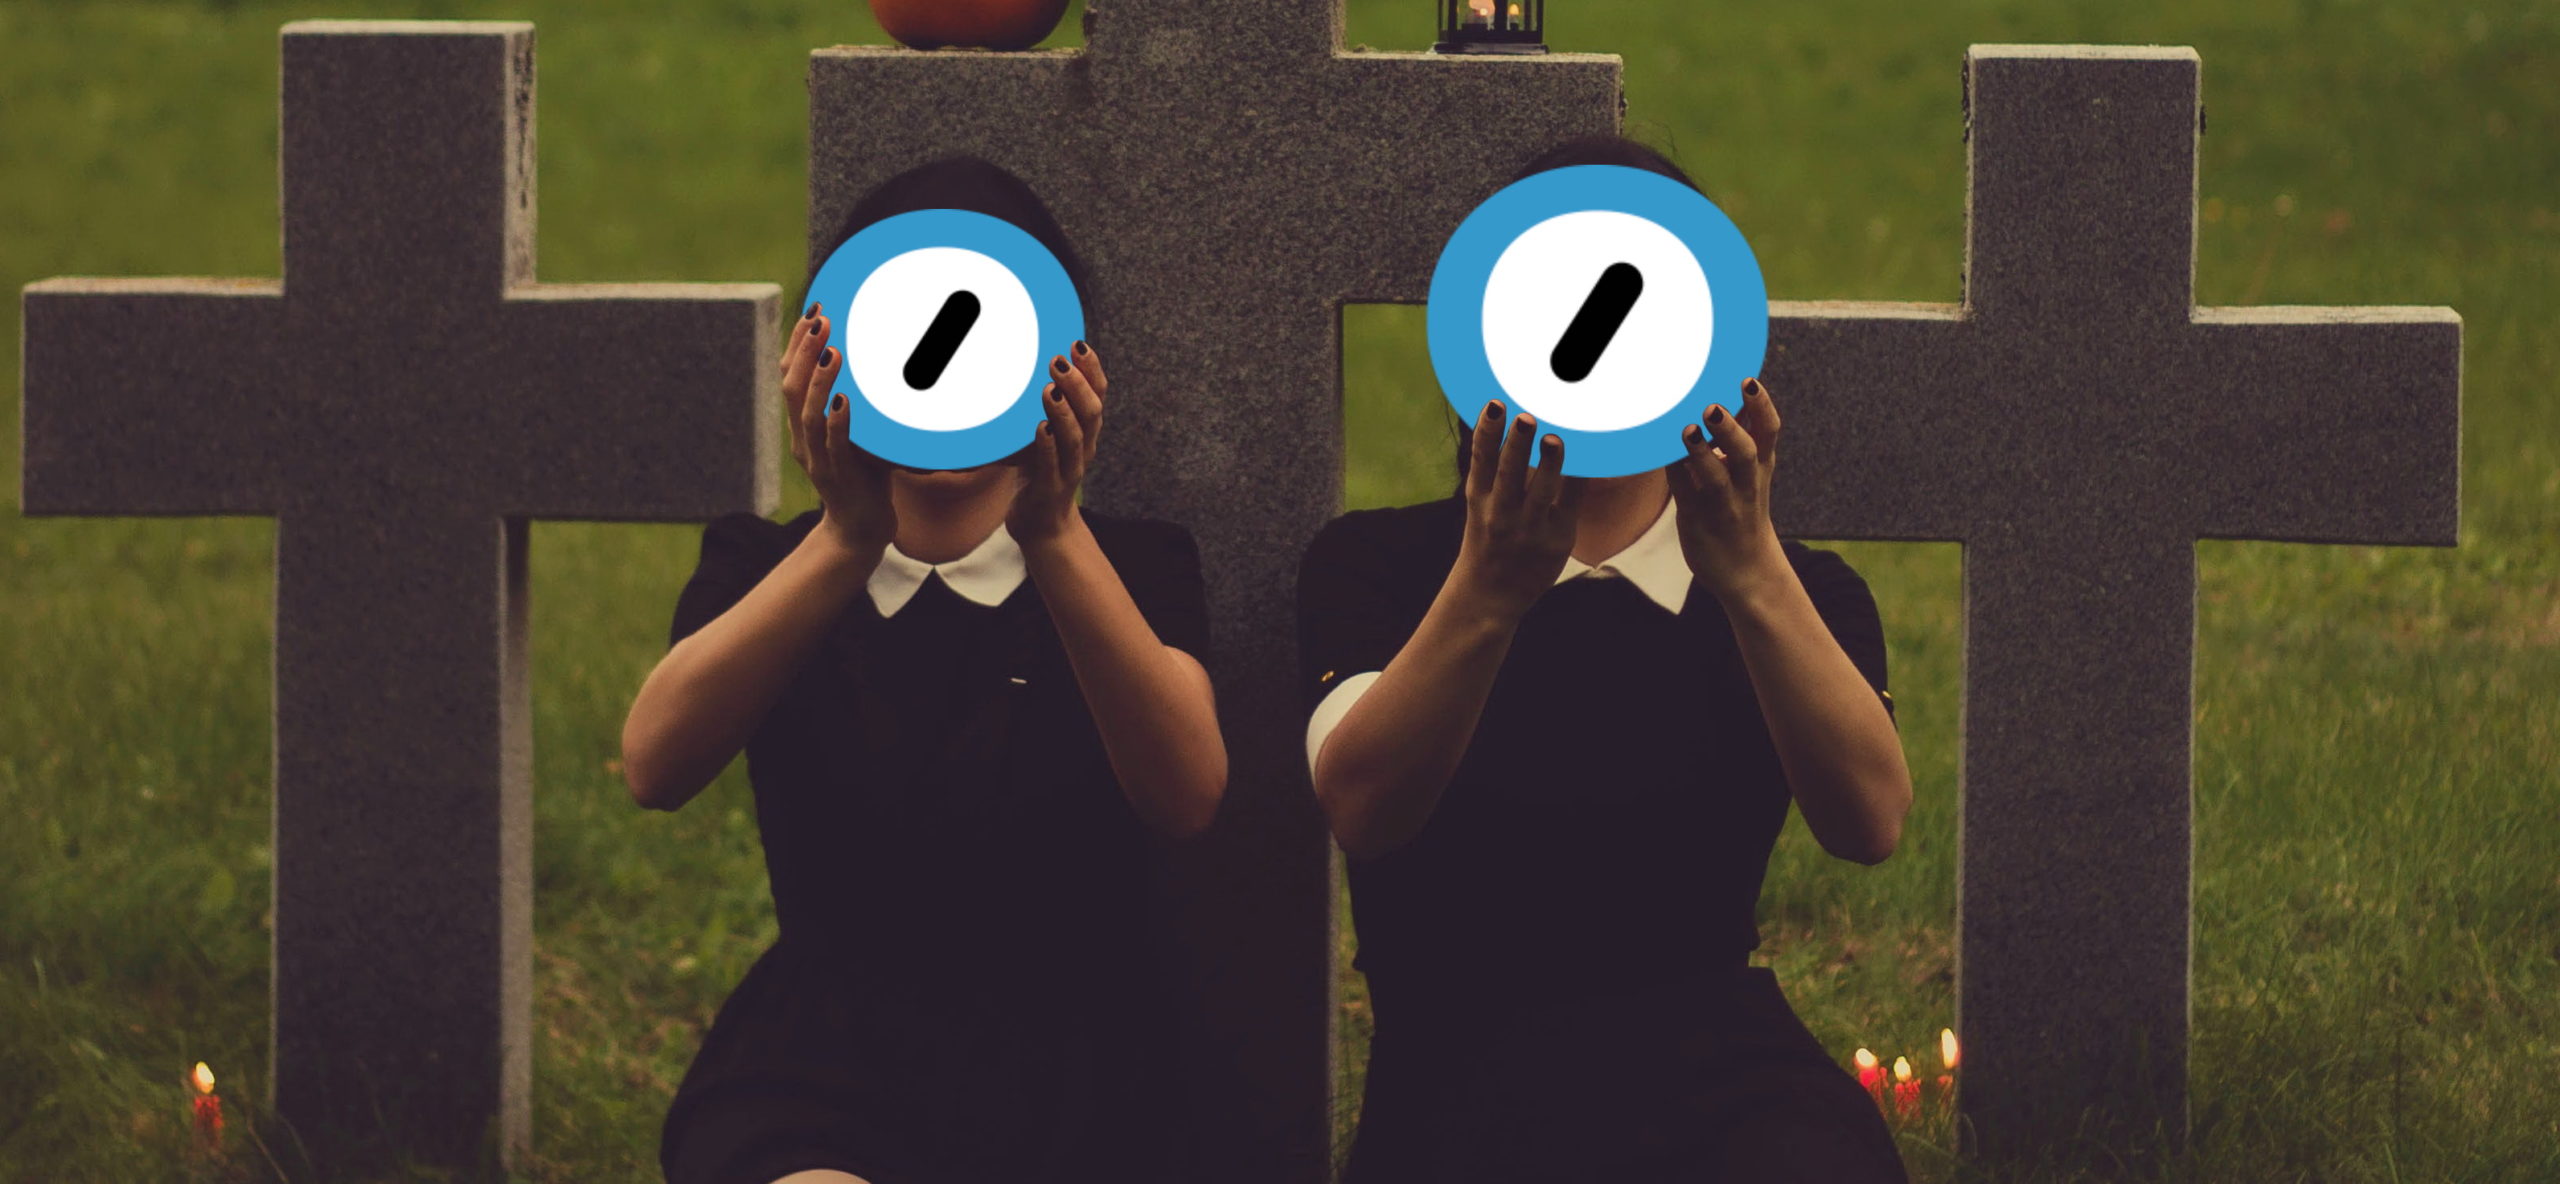 Two women in black dresses sit in a graveyard by candlelight and hold up the Automattic logo. Edited image based on original photo by Valeria Boltneva from Pexels (used with permission) and the Automattic logo (used under the assumption that they won't mind, given the context).